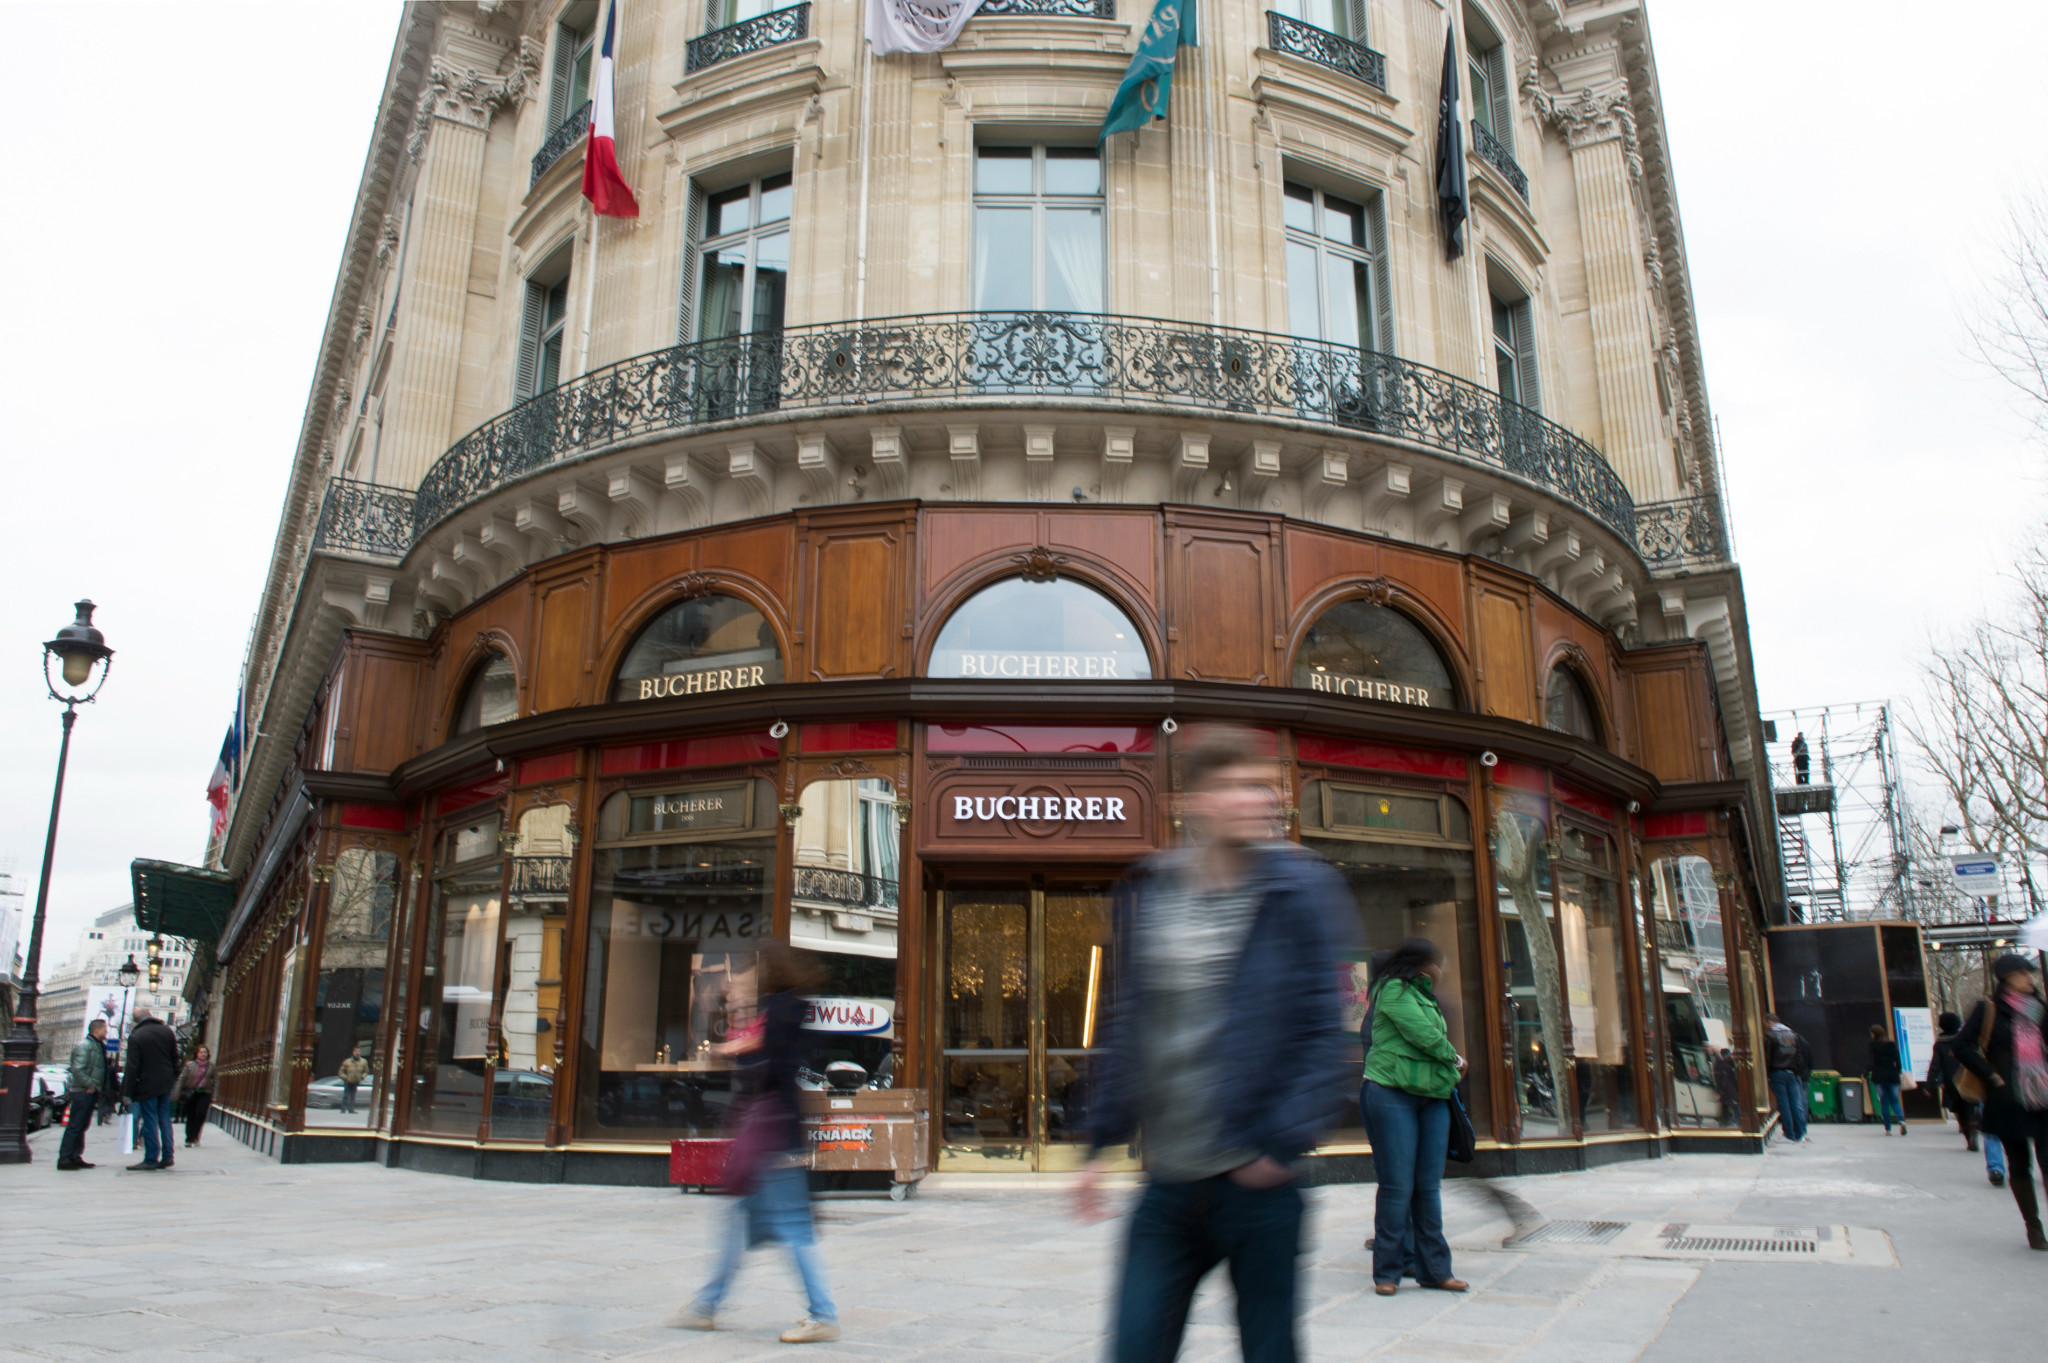 Bucherer's paris boutique opened in 2013 and is one of the largest jewellery and watch showrooms in europe. (photo credit bertrand langlois/afp/getty images)